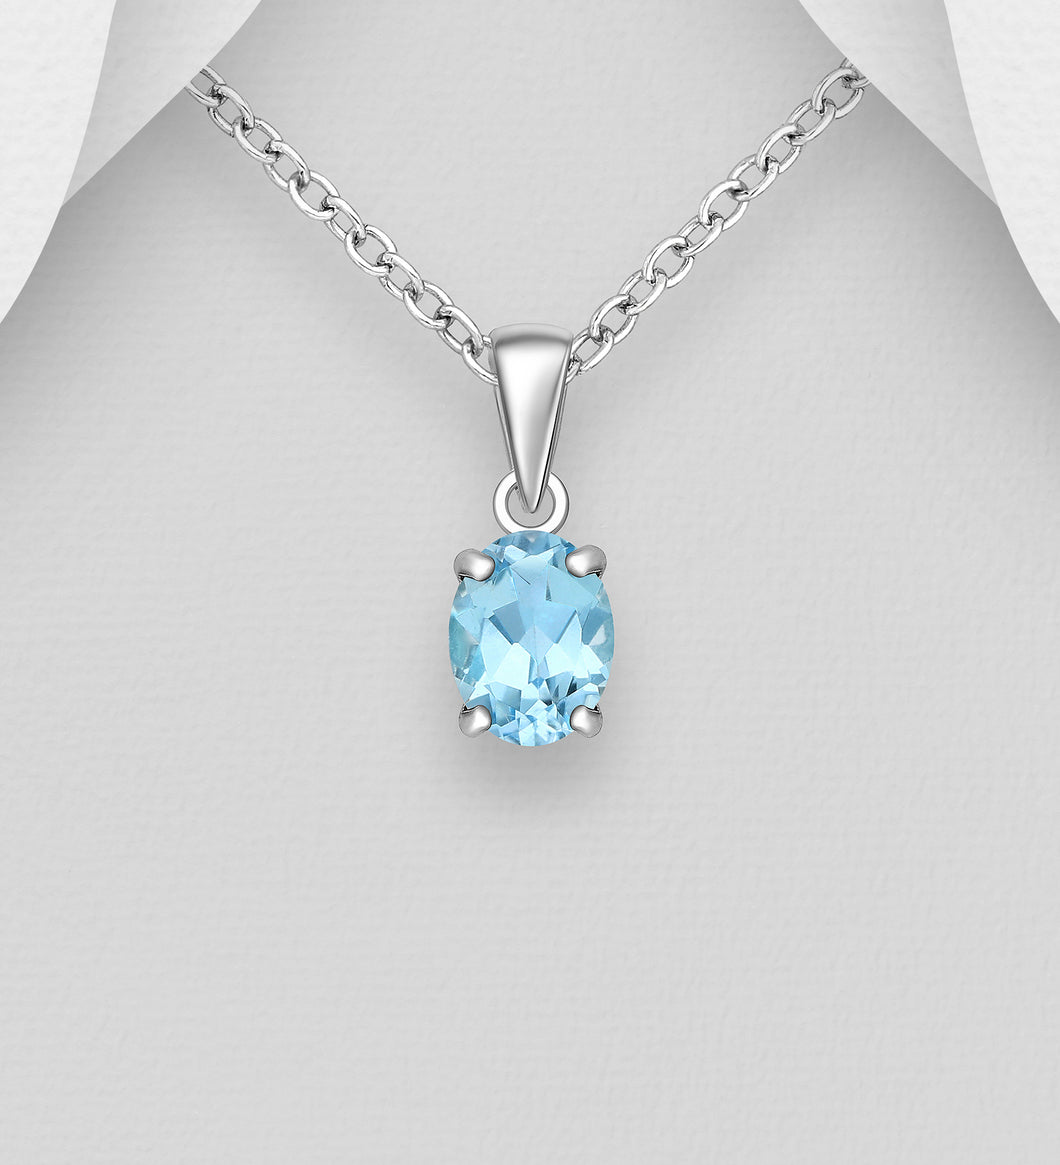 Silver Pendant, Decorated with Natural Topaz Gemstone